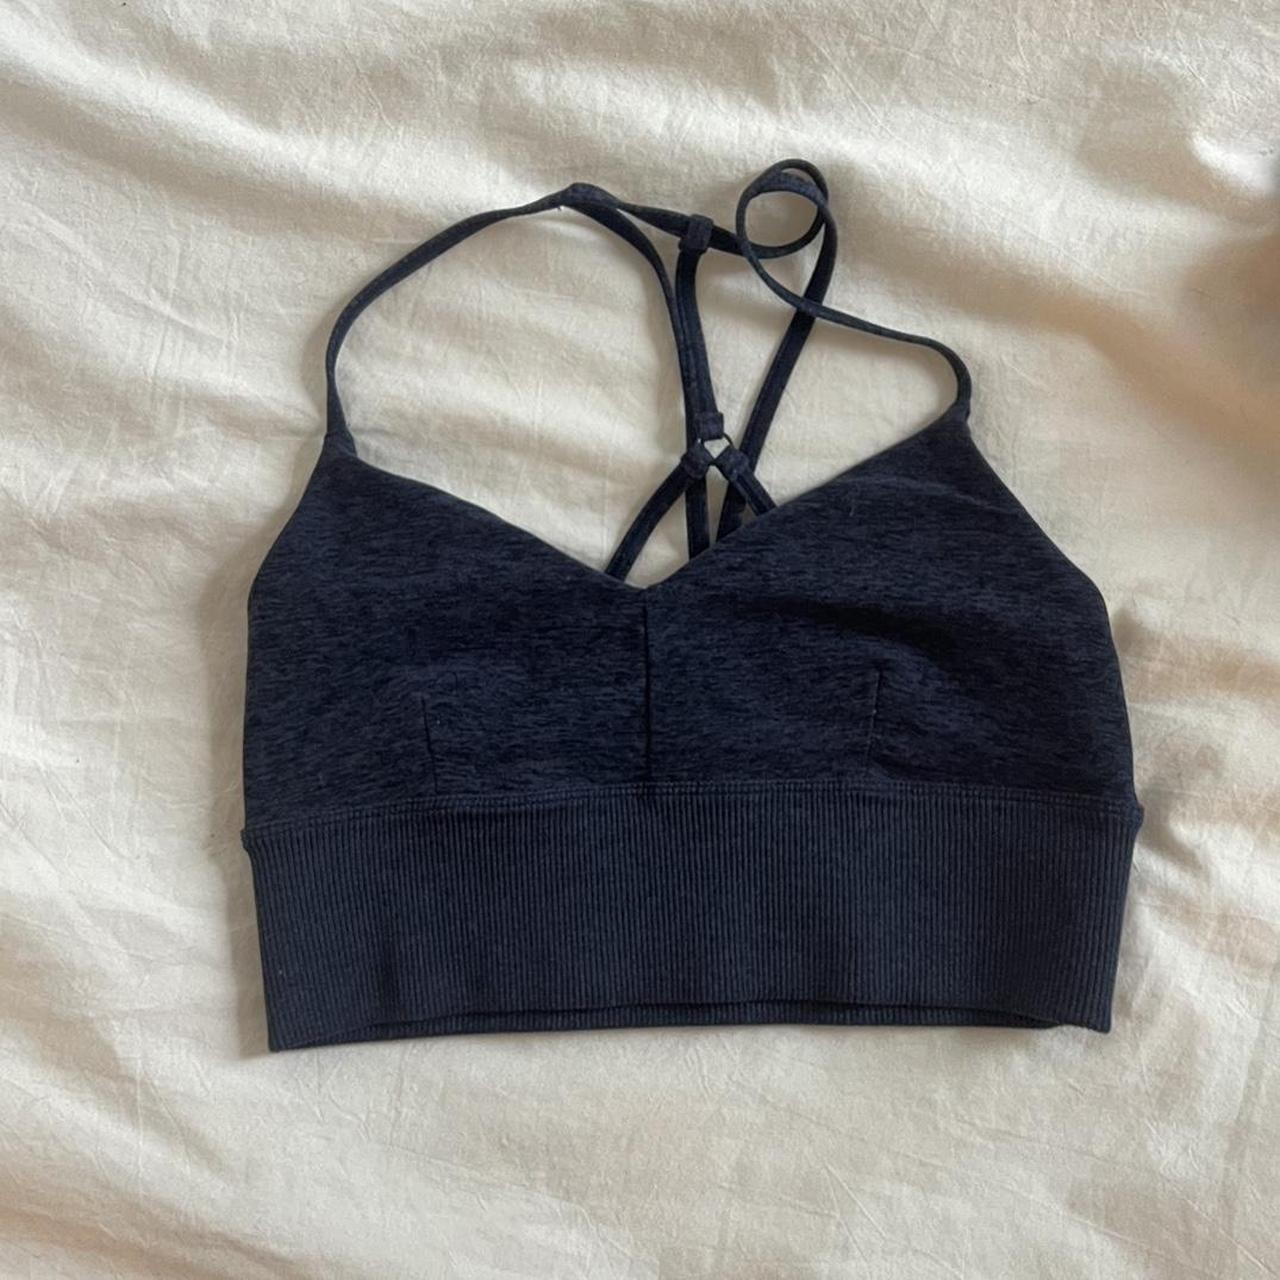 alo sports bra size small, hardly worn excellent